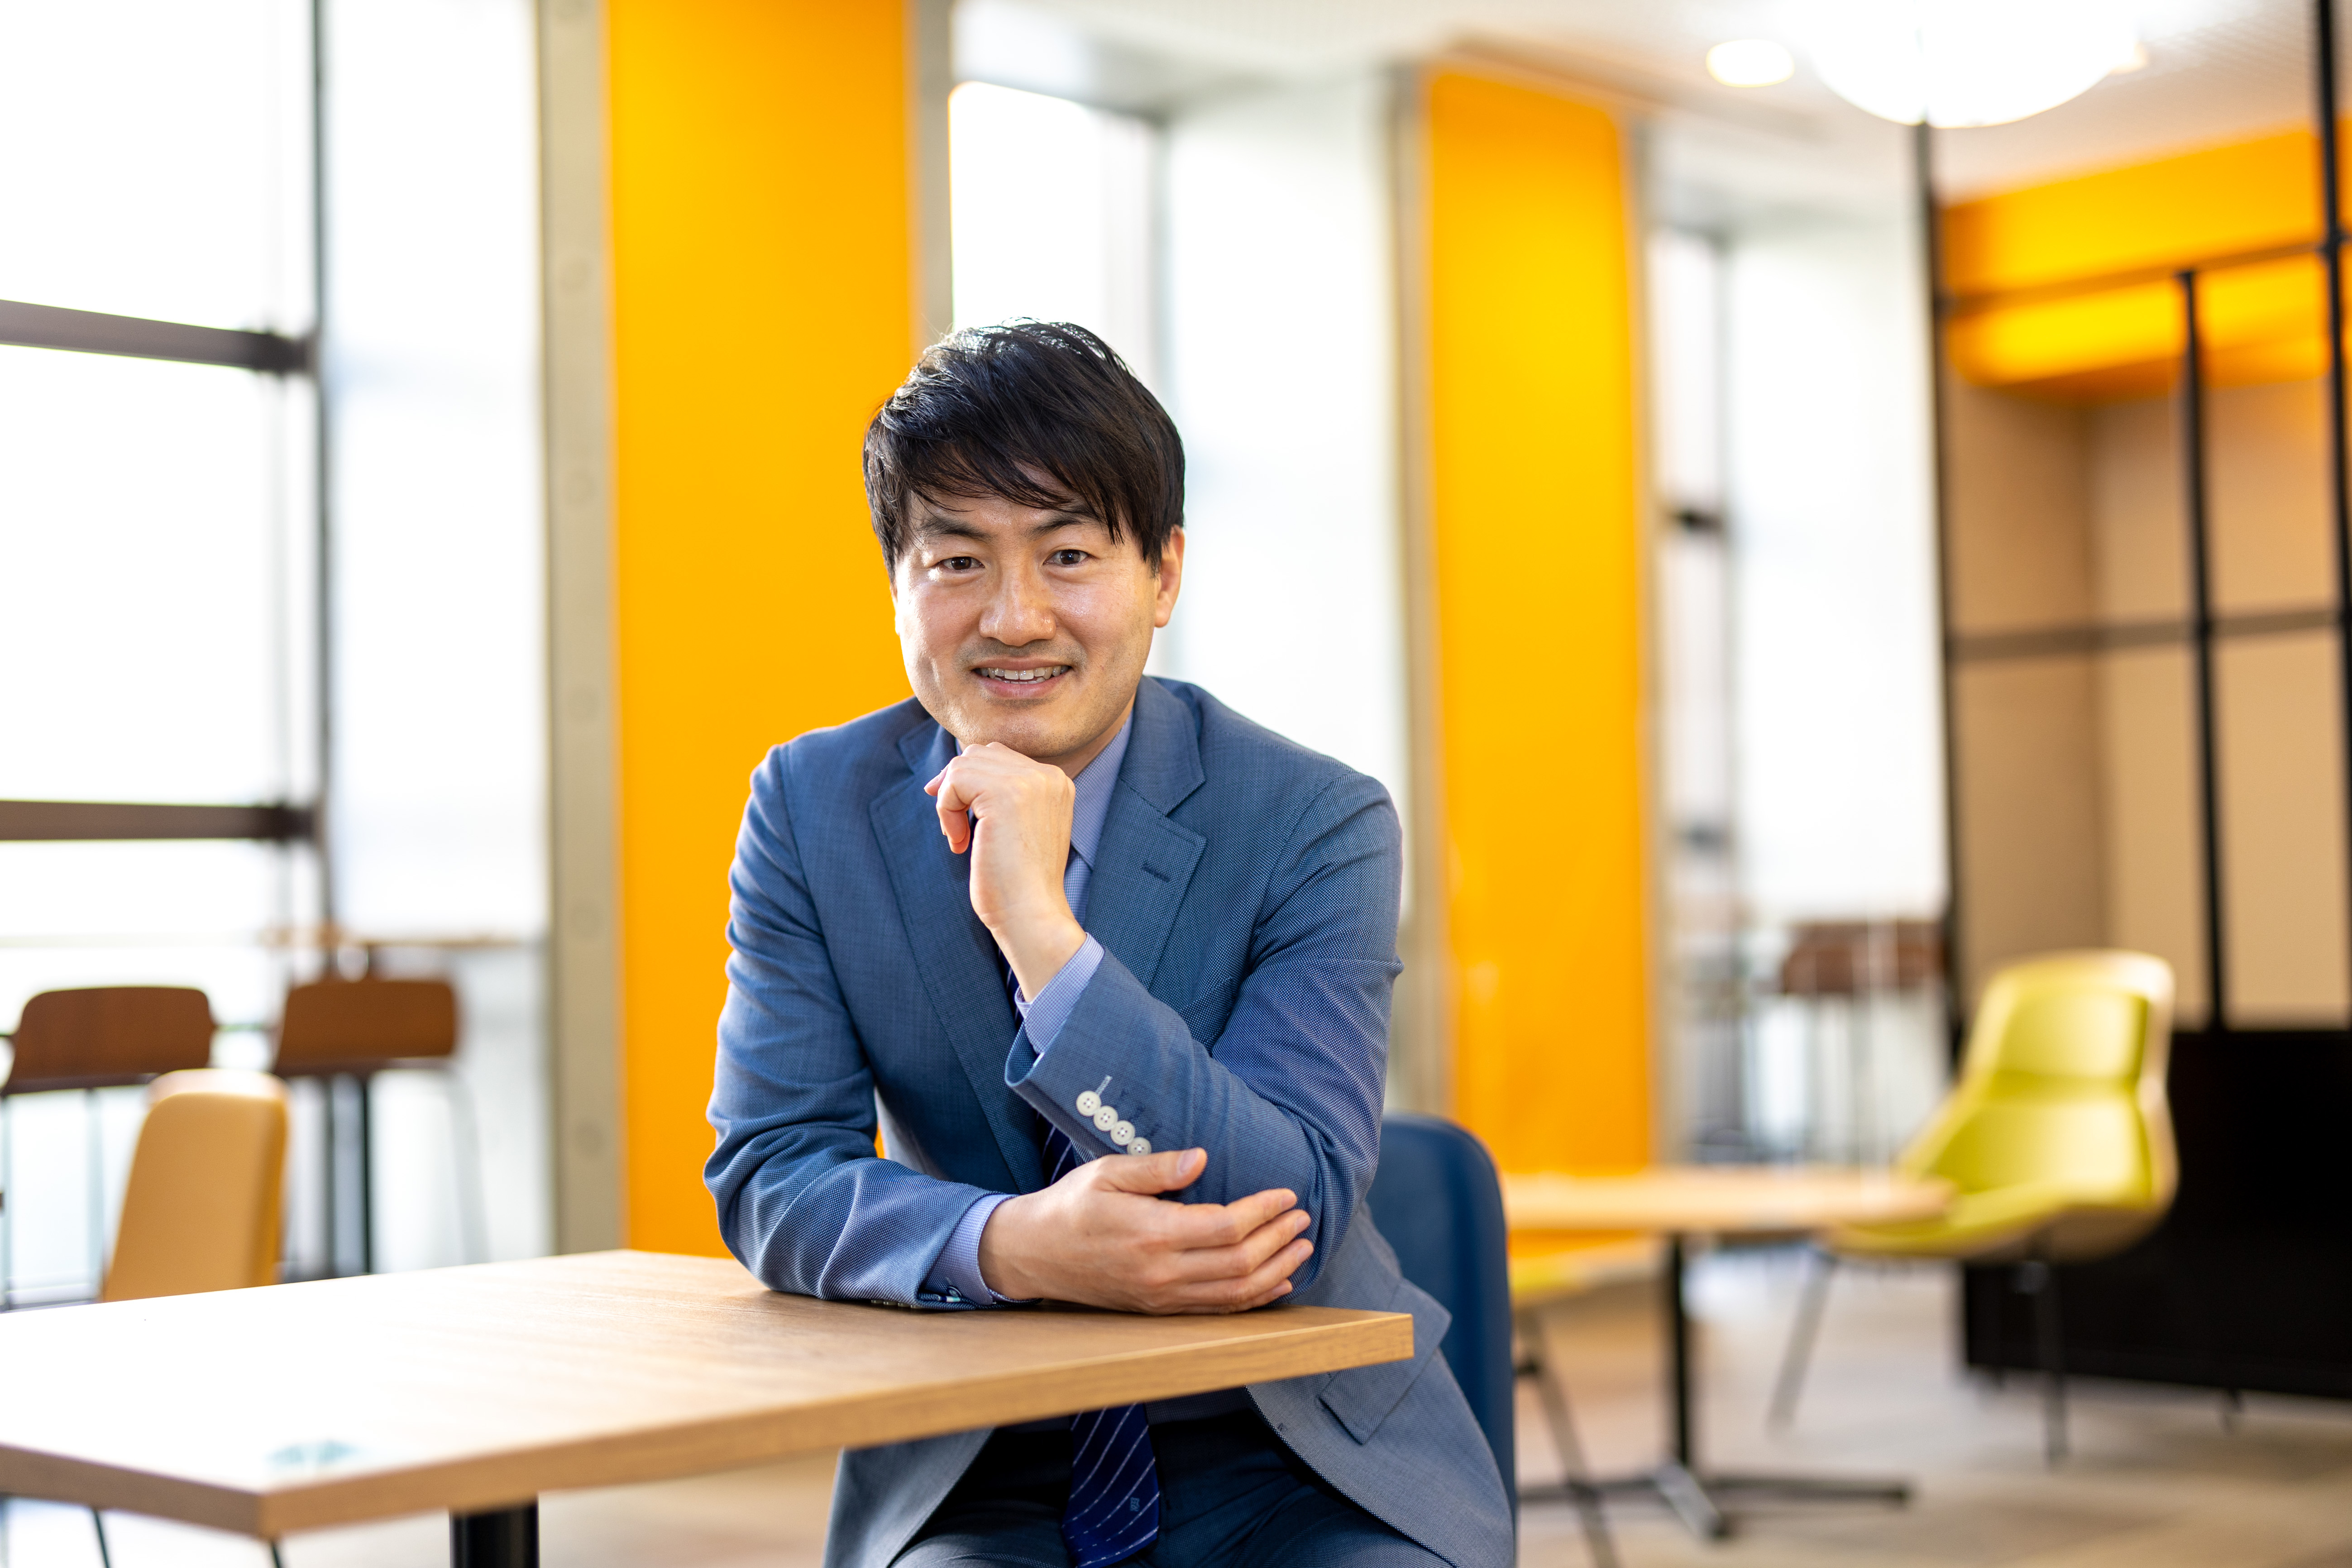 Dr. Shin Hyeoncheol, Specially Appointed Associate Professor, Intellectual Property and Legal Practice Center (IPrism)